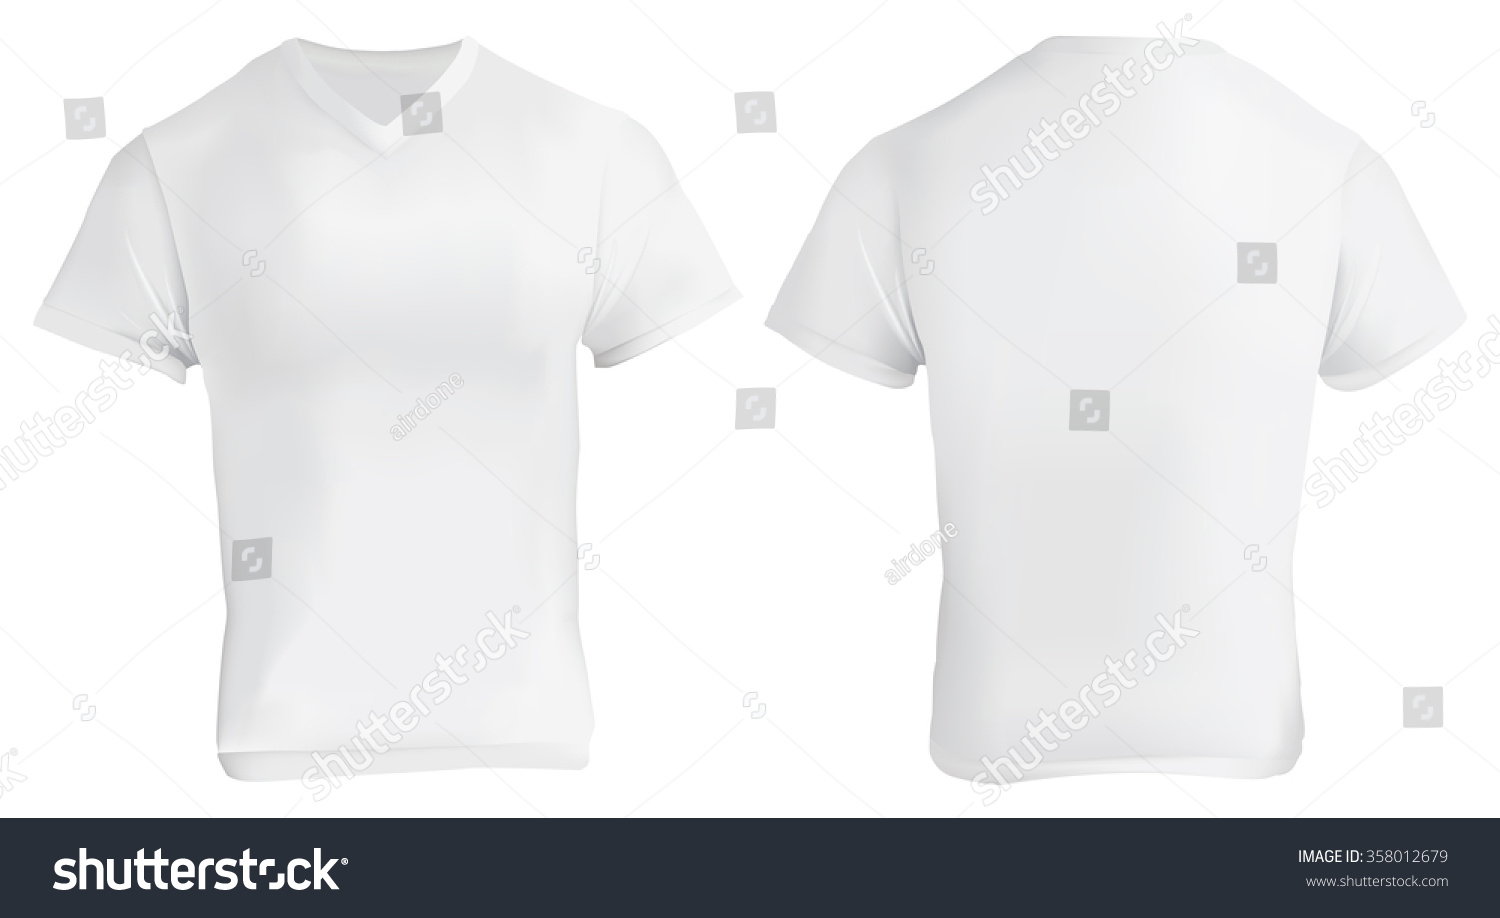 Vector Illustration Of Blank White V-Neck Shirt Template, Front And ...